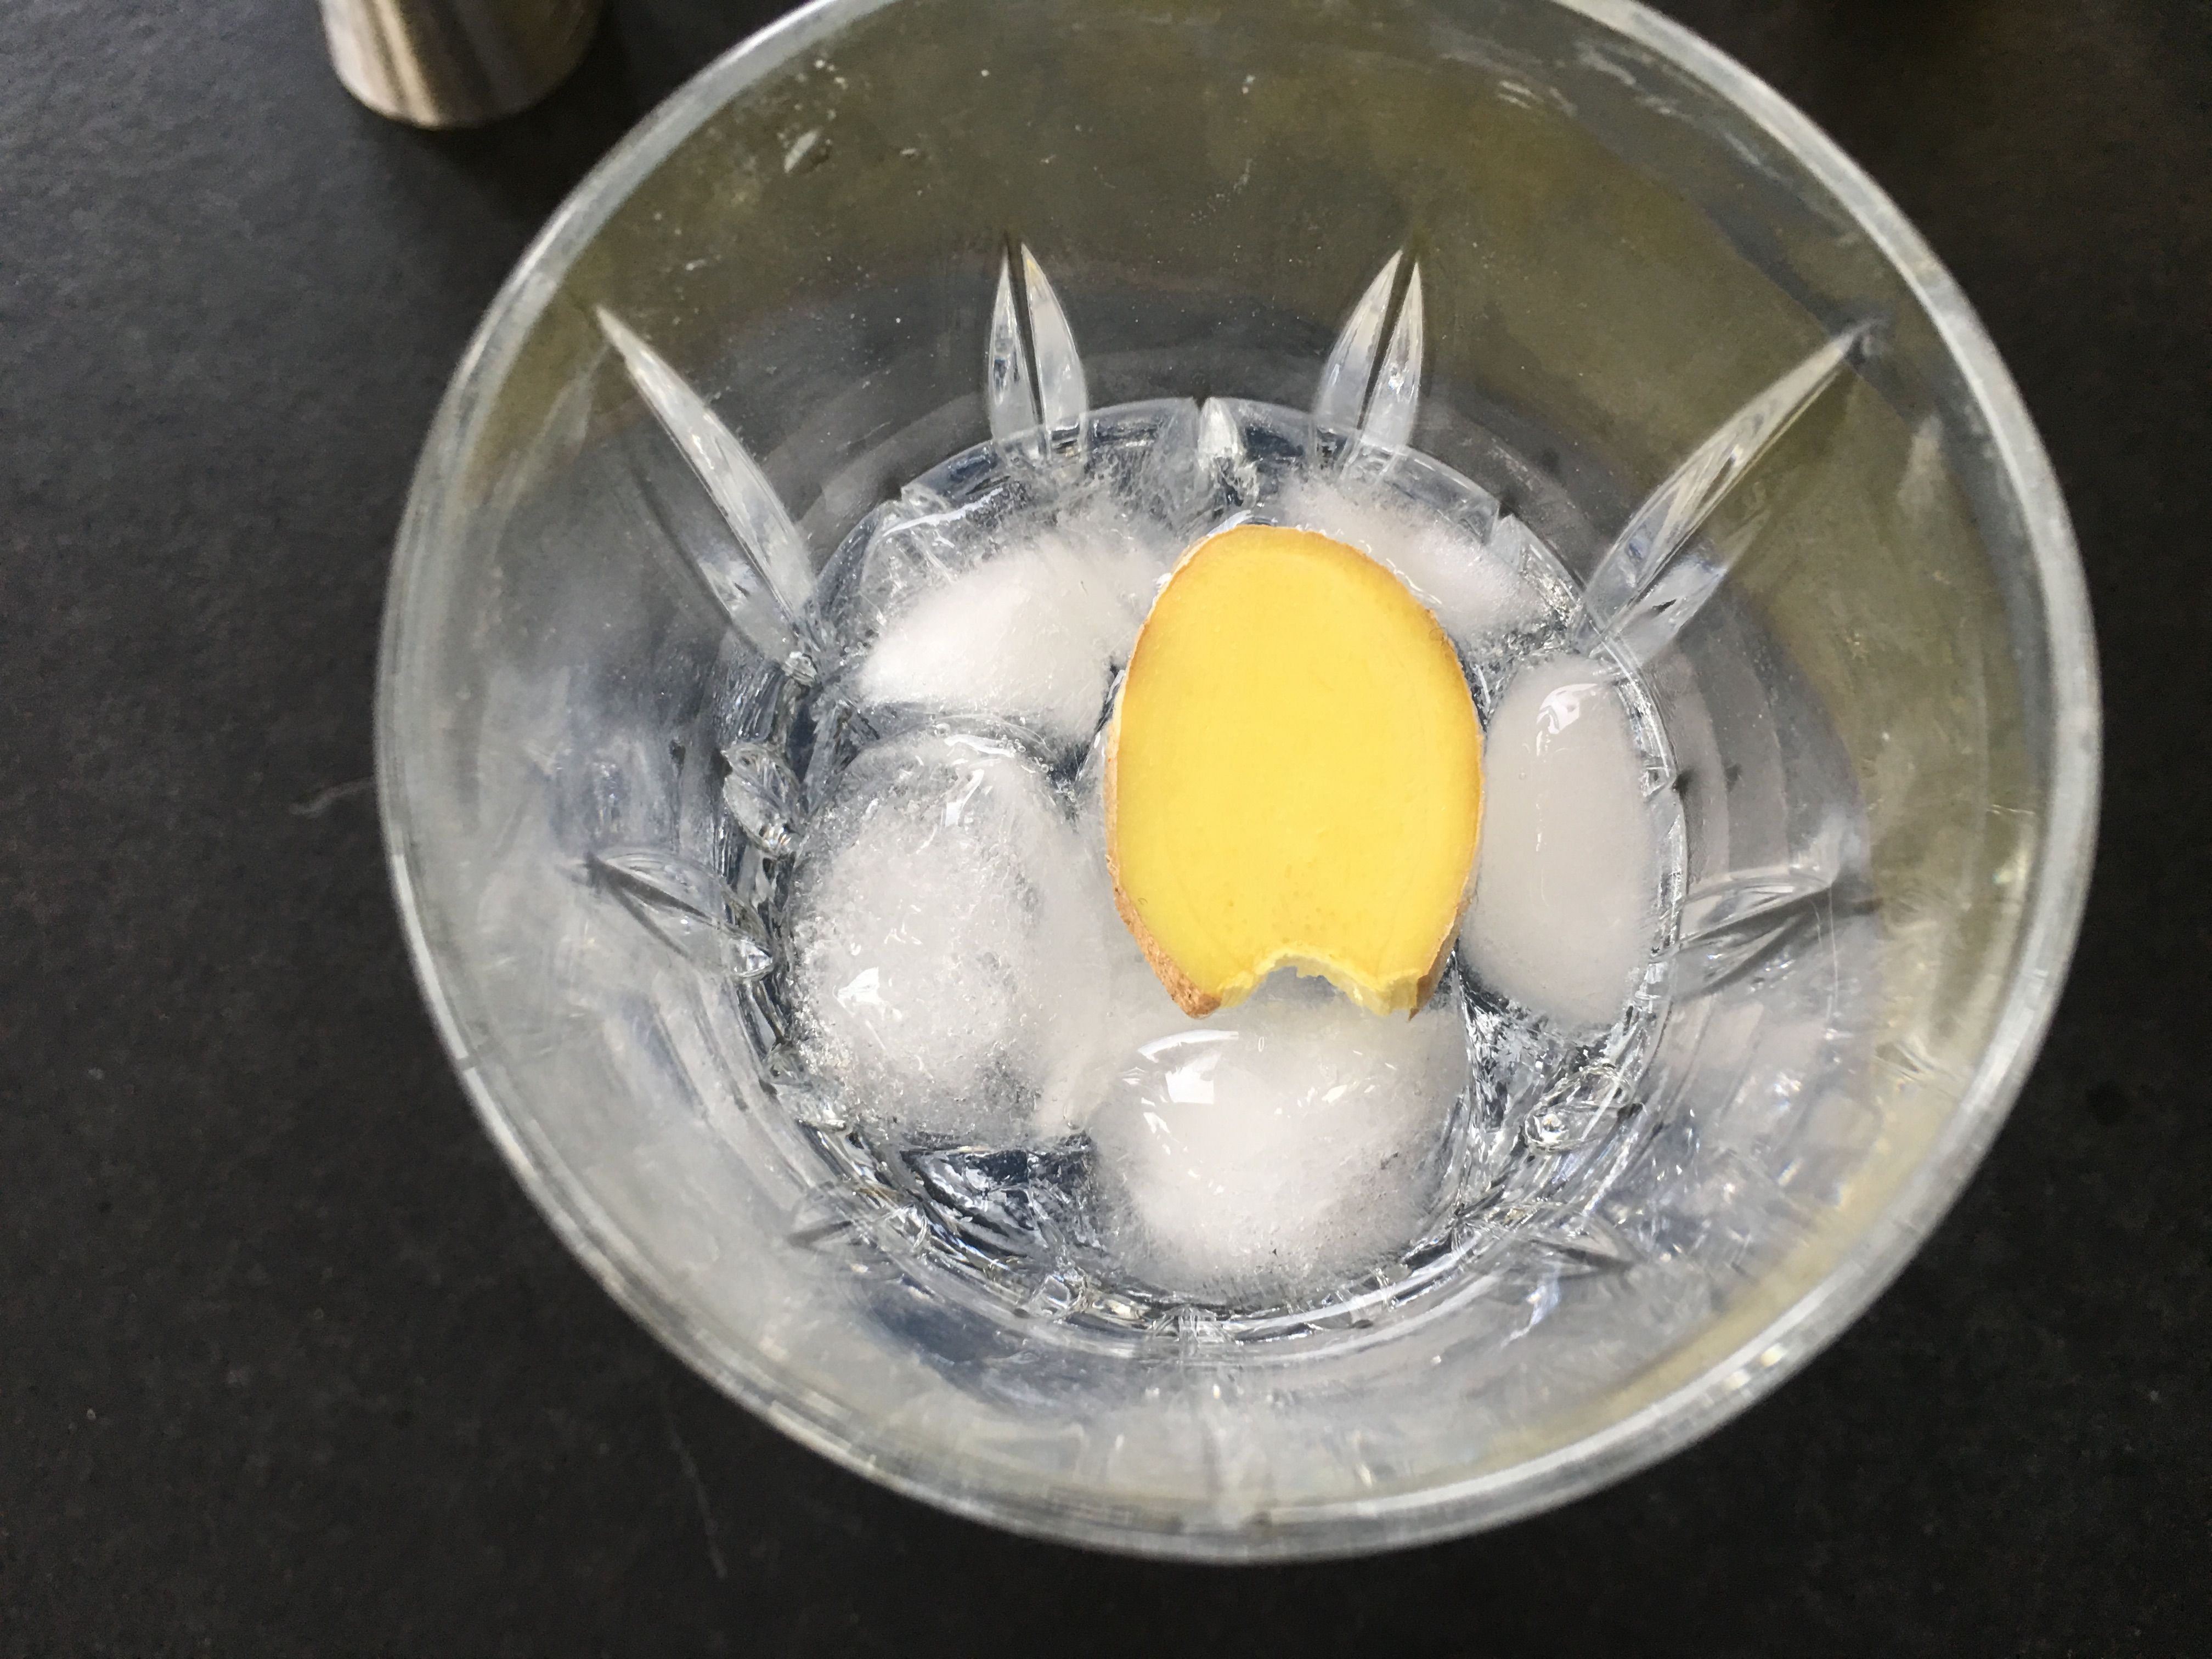 Gin Tonic on Steemit - A How To by Detlev (17).JPG